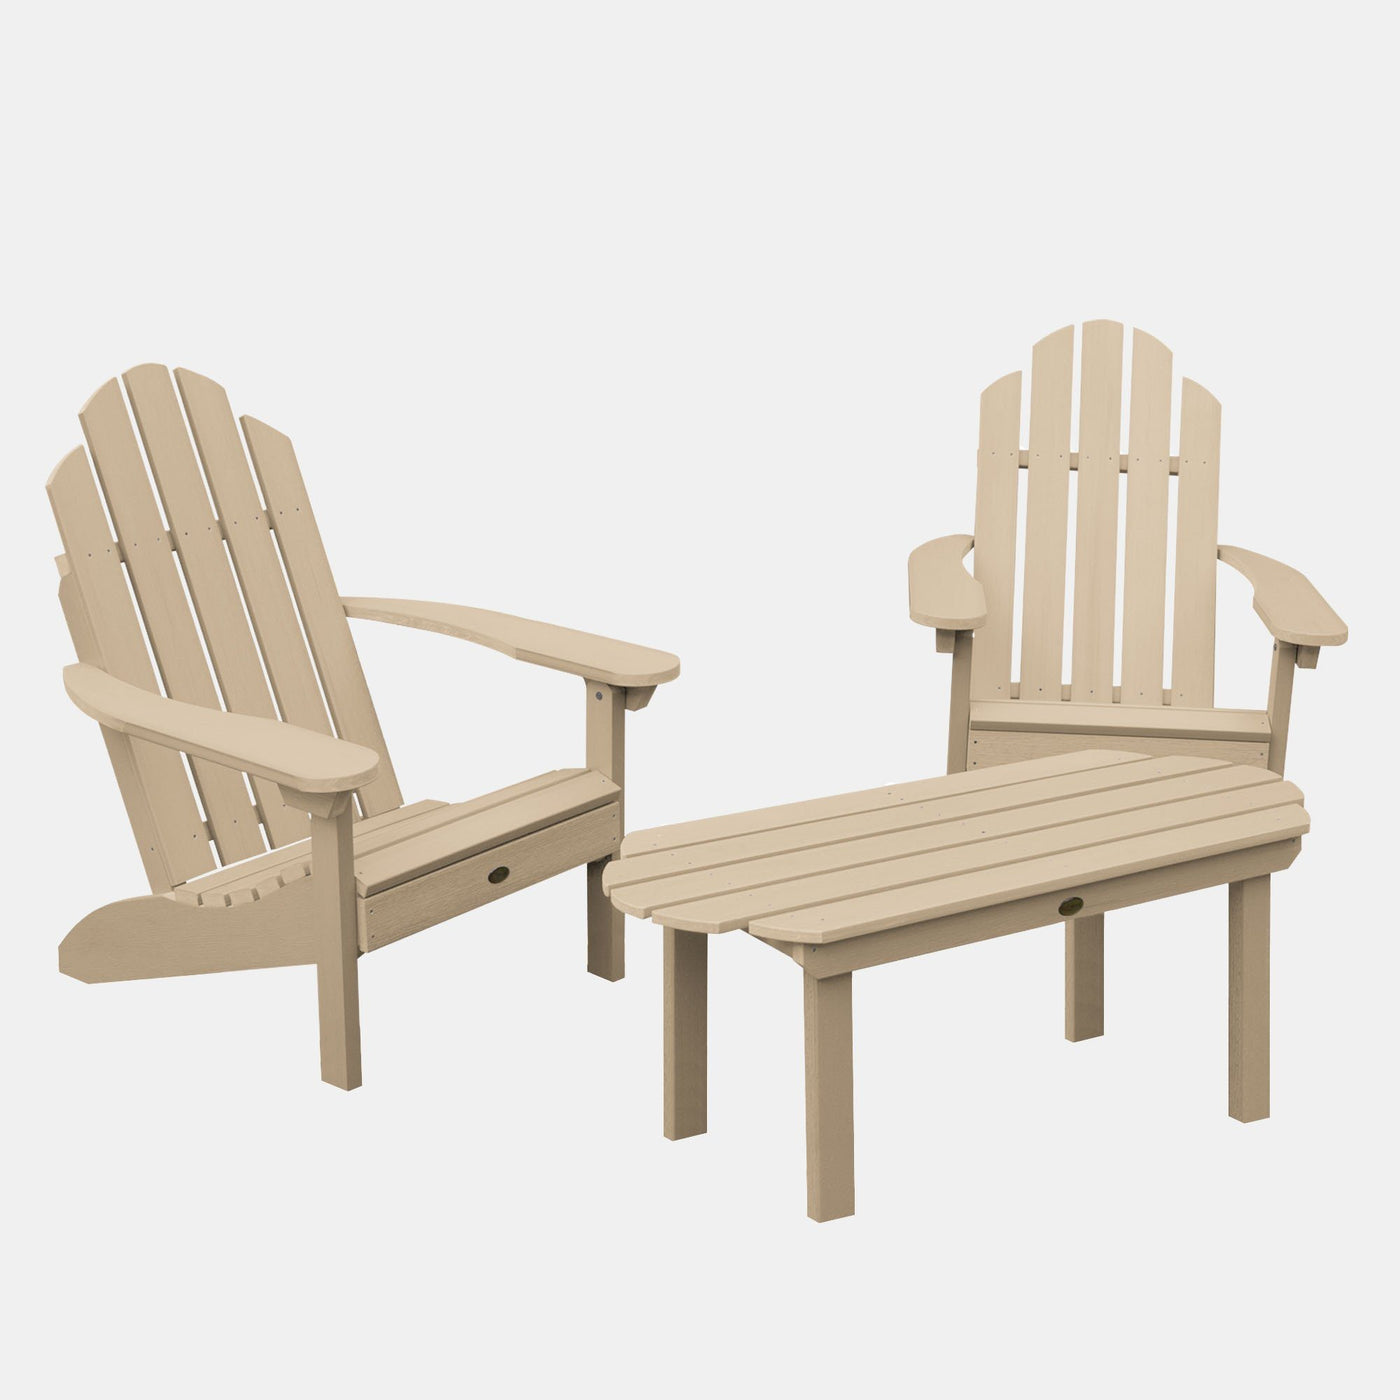 2 Westport Adirondack Chairs with 1 Westport Conversation Table Highwood USA Tuscan Taupe 